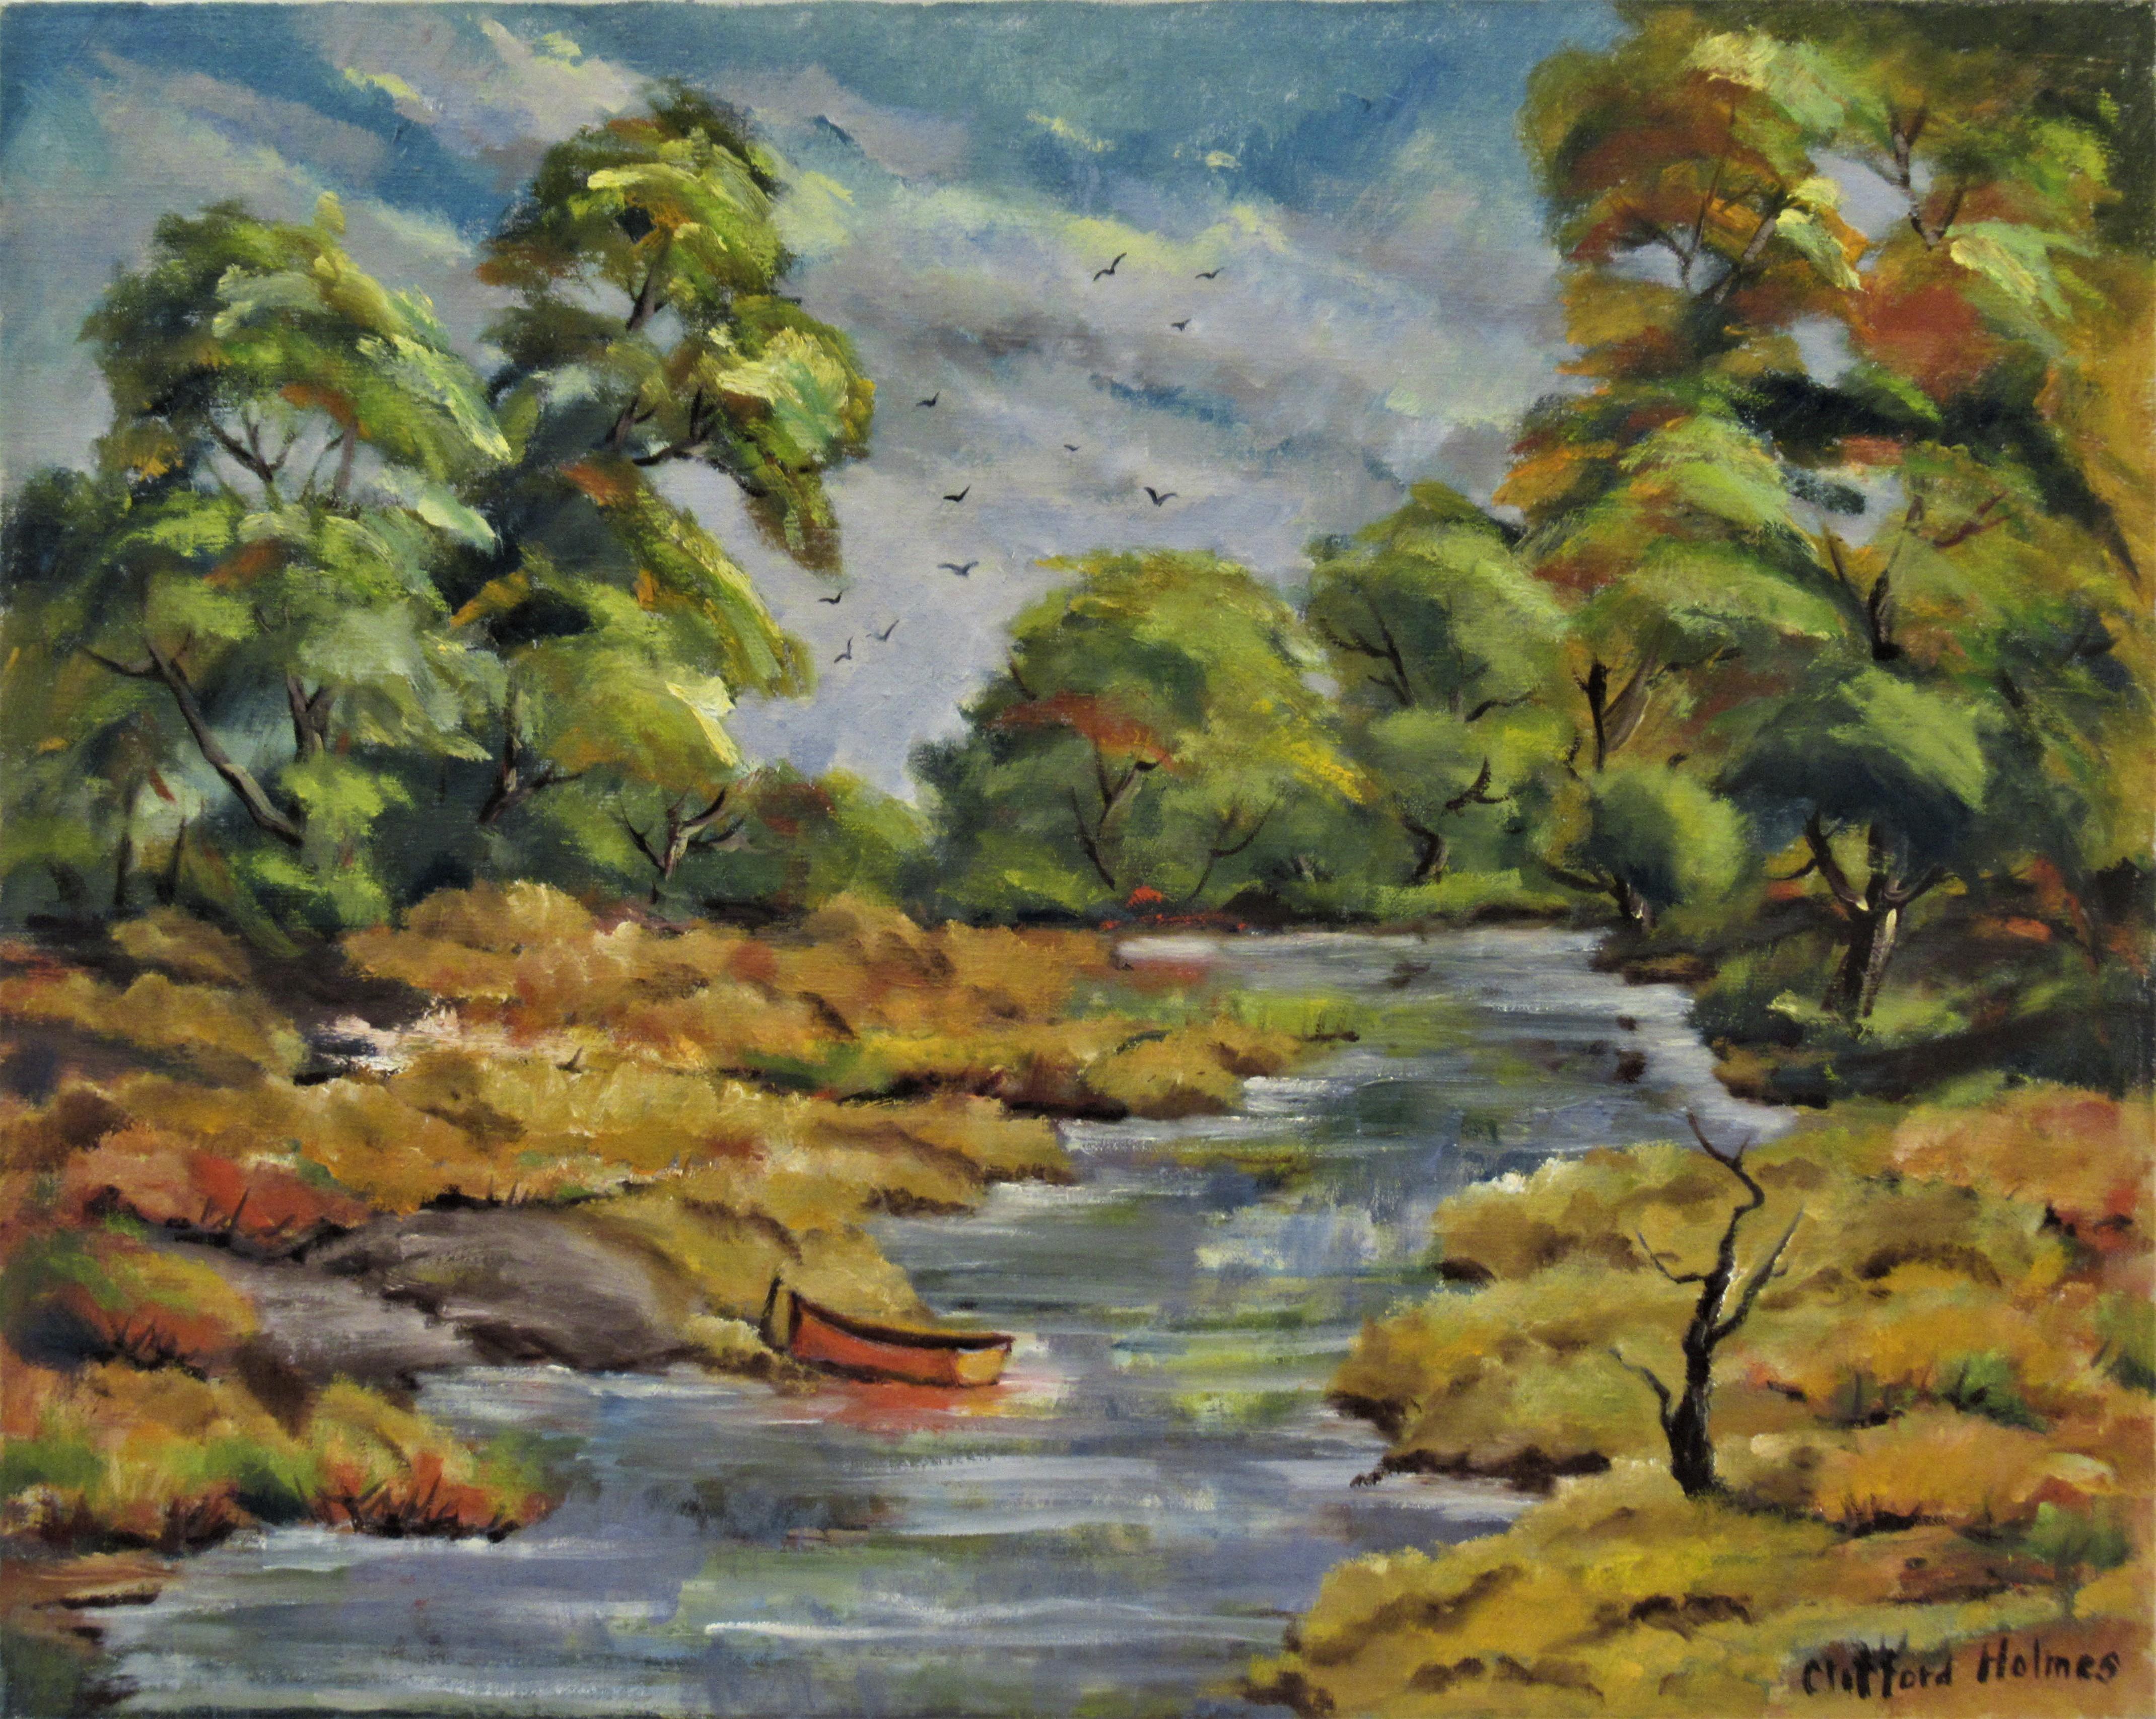 Clifford Holmes Figurative Painting - Landscape with River, California